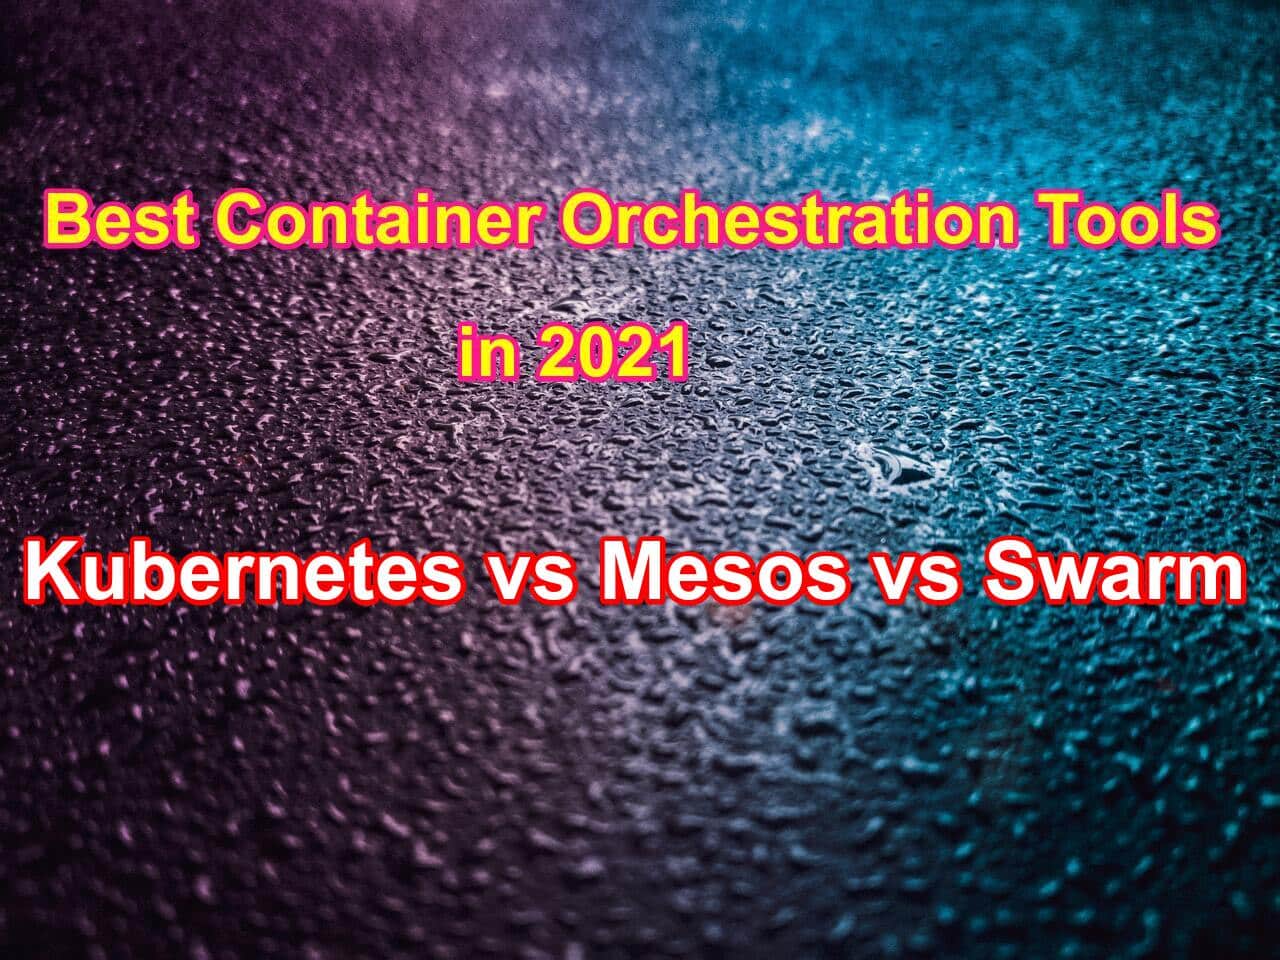 Comparing the best Container Orchestration Tools in 2021: Kubernetes vs Mesos vs Swarm